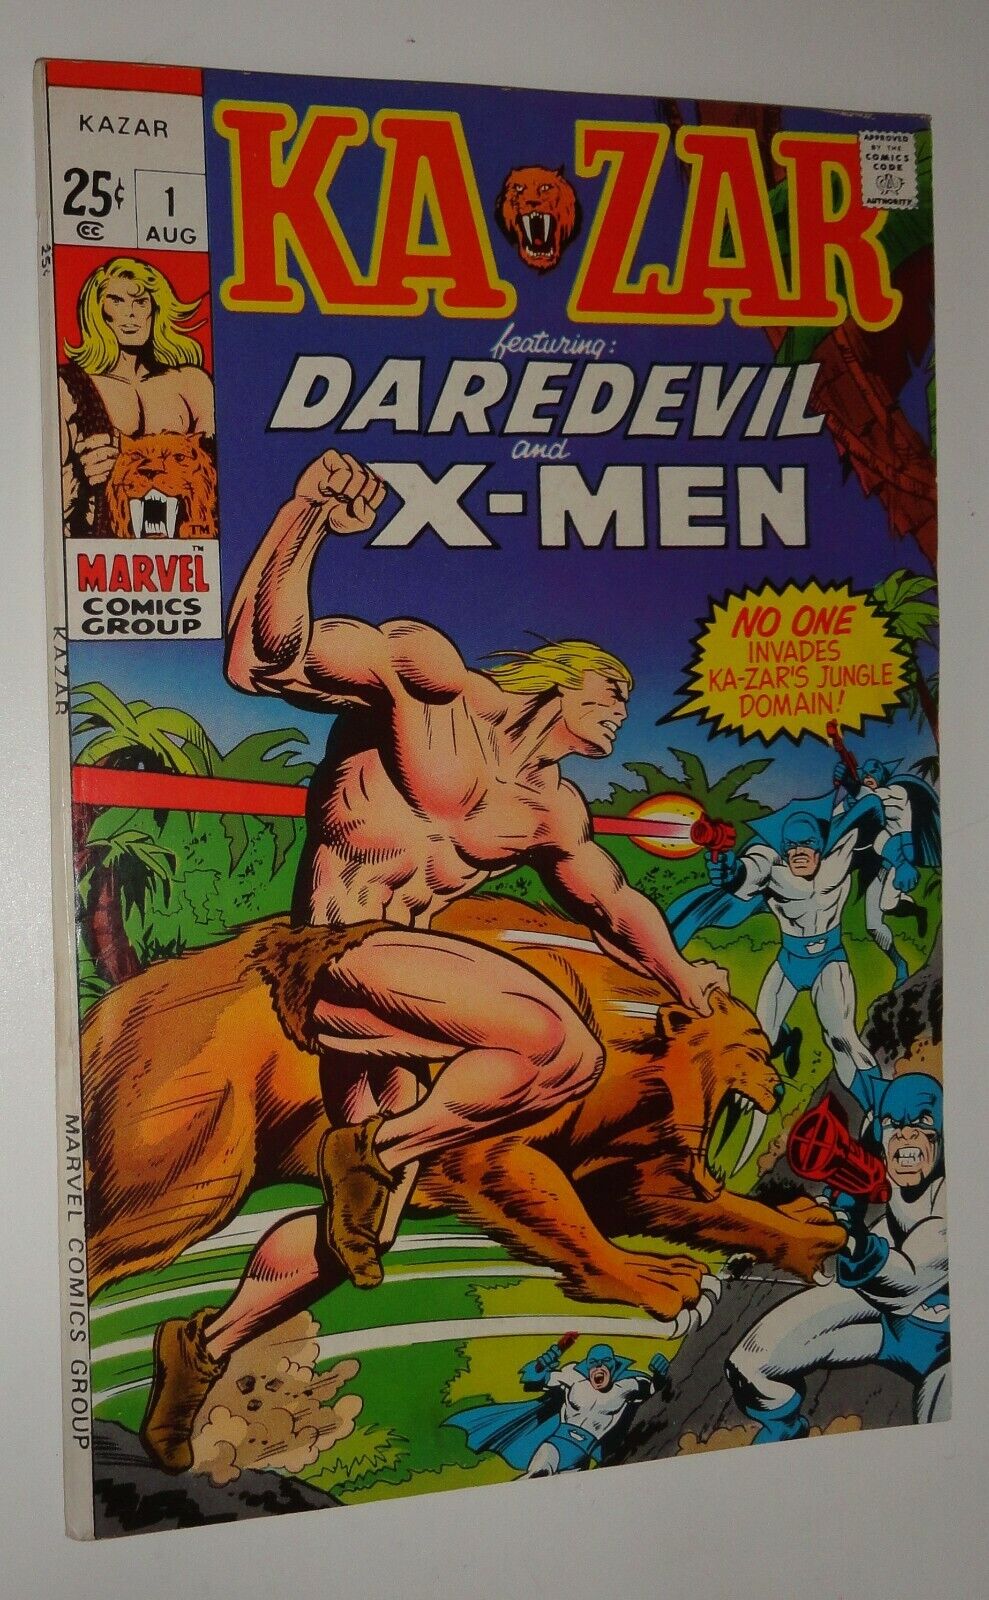 KA-ZAR #1 68 PAGE GIANT 9.0/9.2 WHITE PAGES  1970 DAREDEVIL AND X-MEN